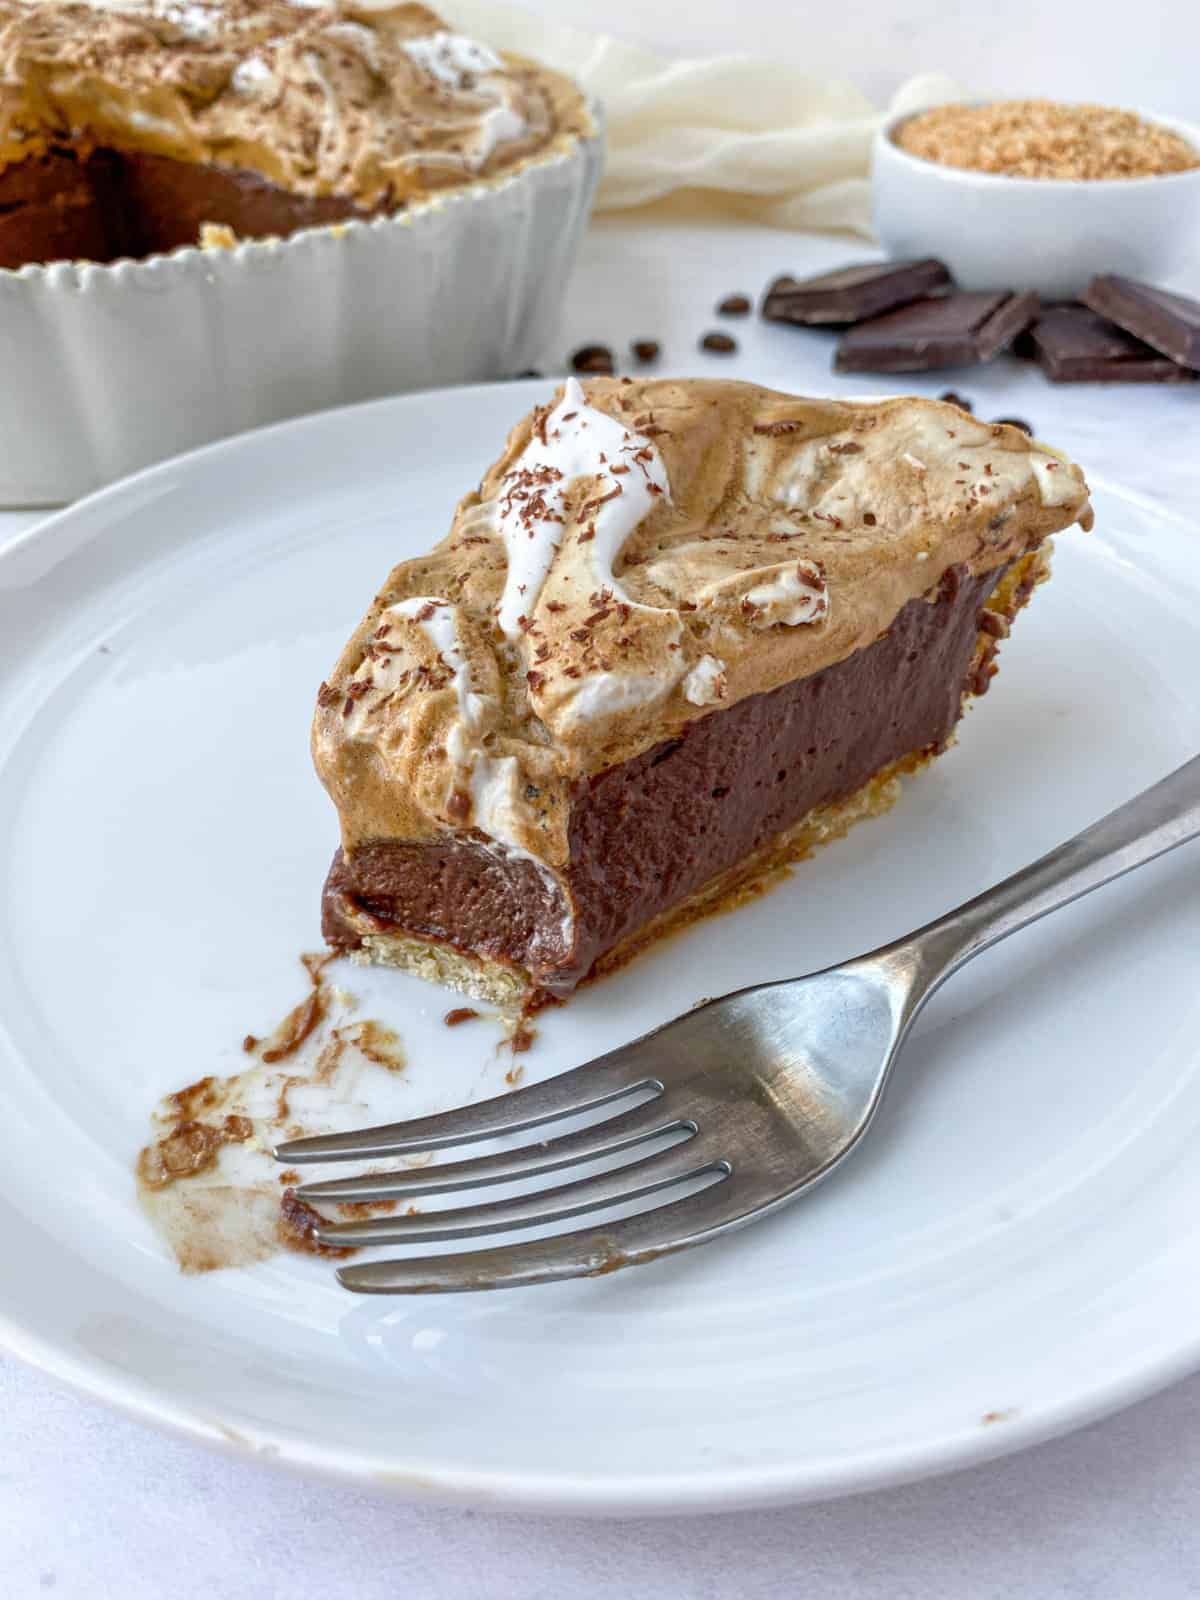 a slice of coconut mocha pie featuring a toasted coconut pastry crust filled with dark chocolate custard and topped with Dalgona coffee mixed with whipped coconut cream.